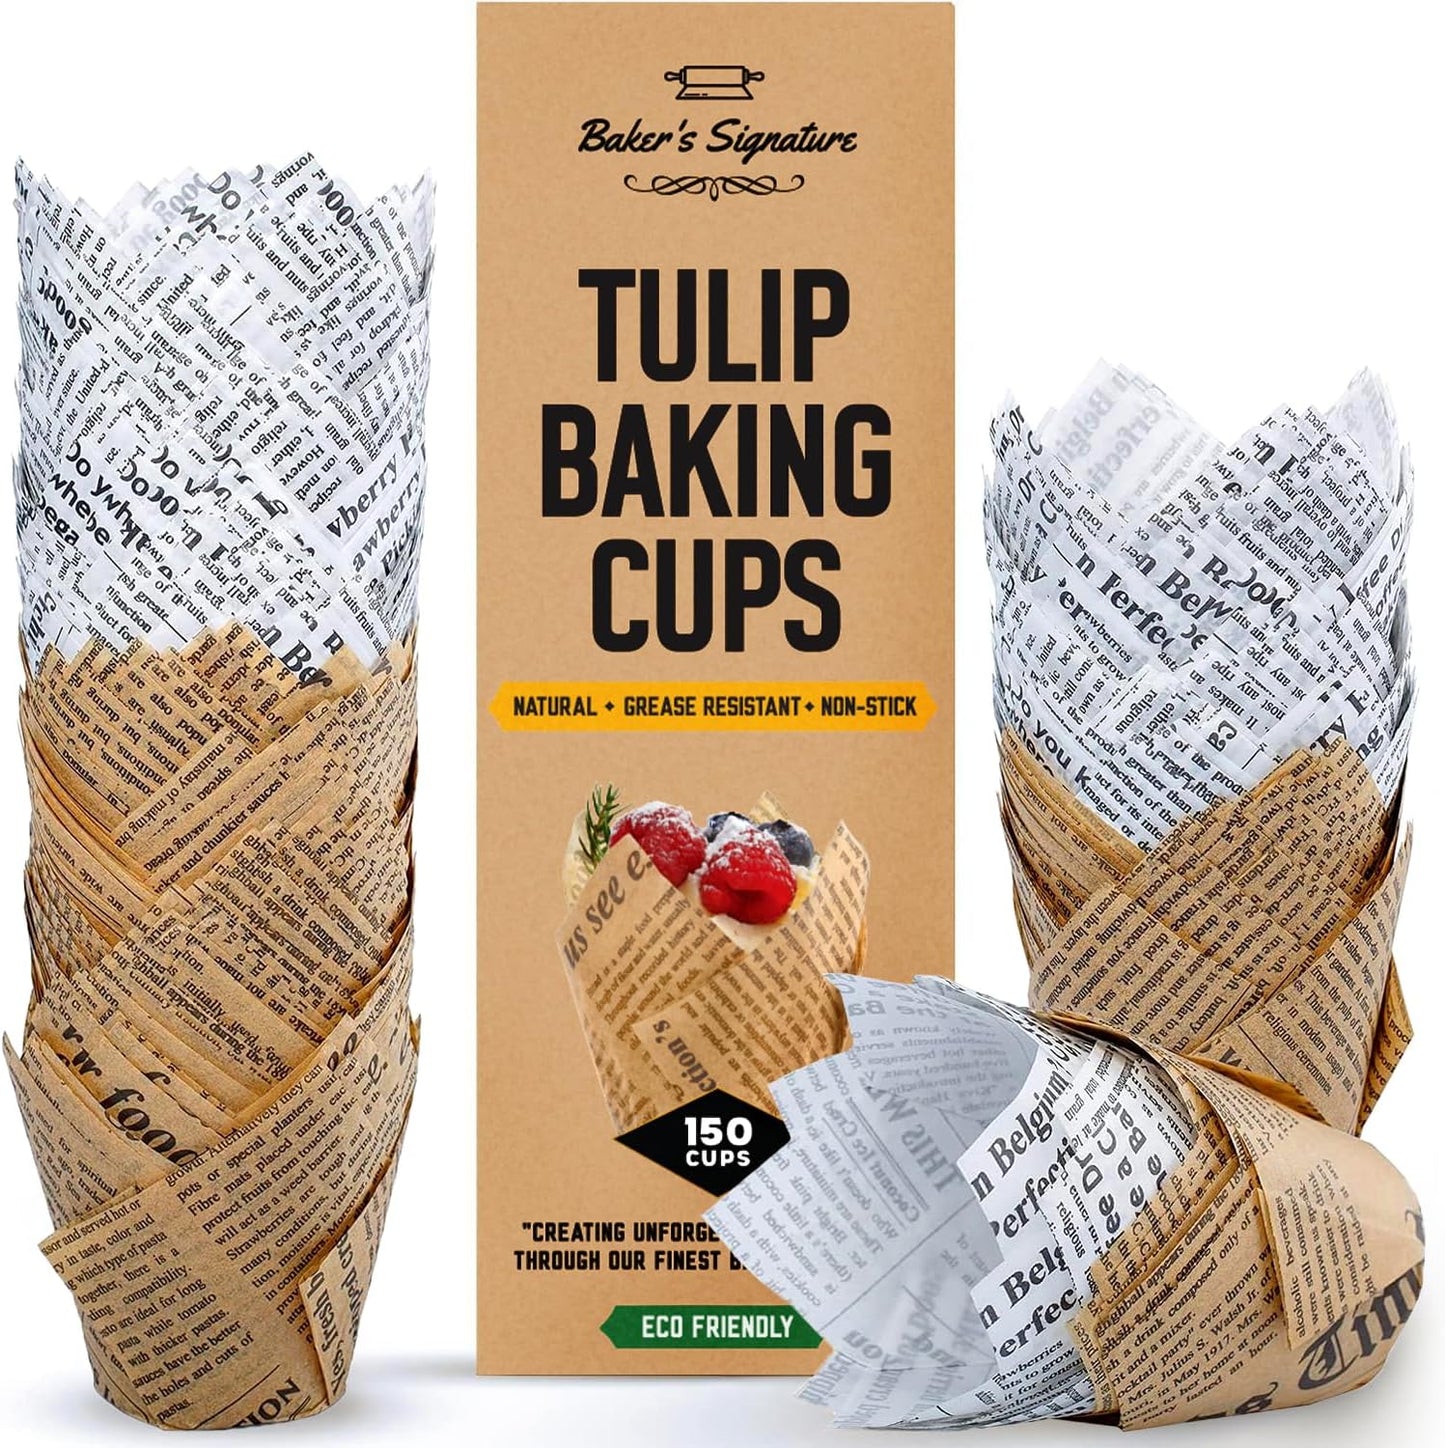 Tulip Cupcake Liners, Muffin Liners for Baking by Baker’s Signature – 150pcs of Parchment Paper Cups Cupcake Wrappers – Perfect Size, Sturdy, Greaseproof & Easy to Use – Beige White Brown